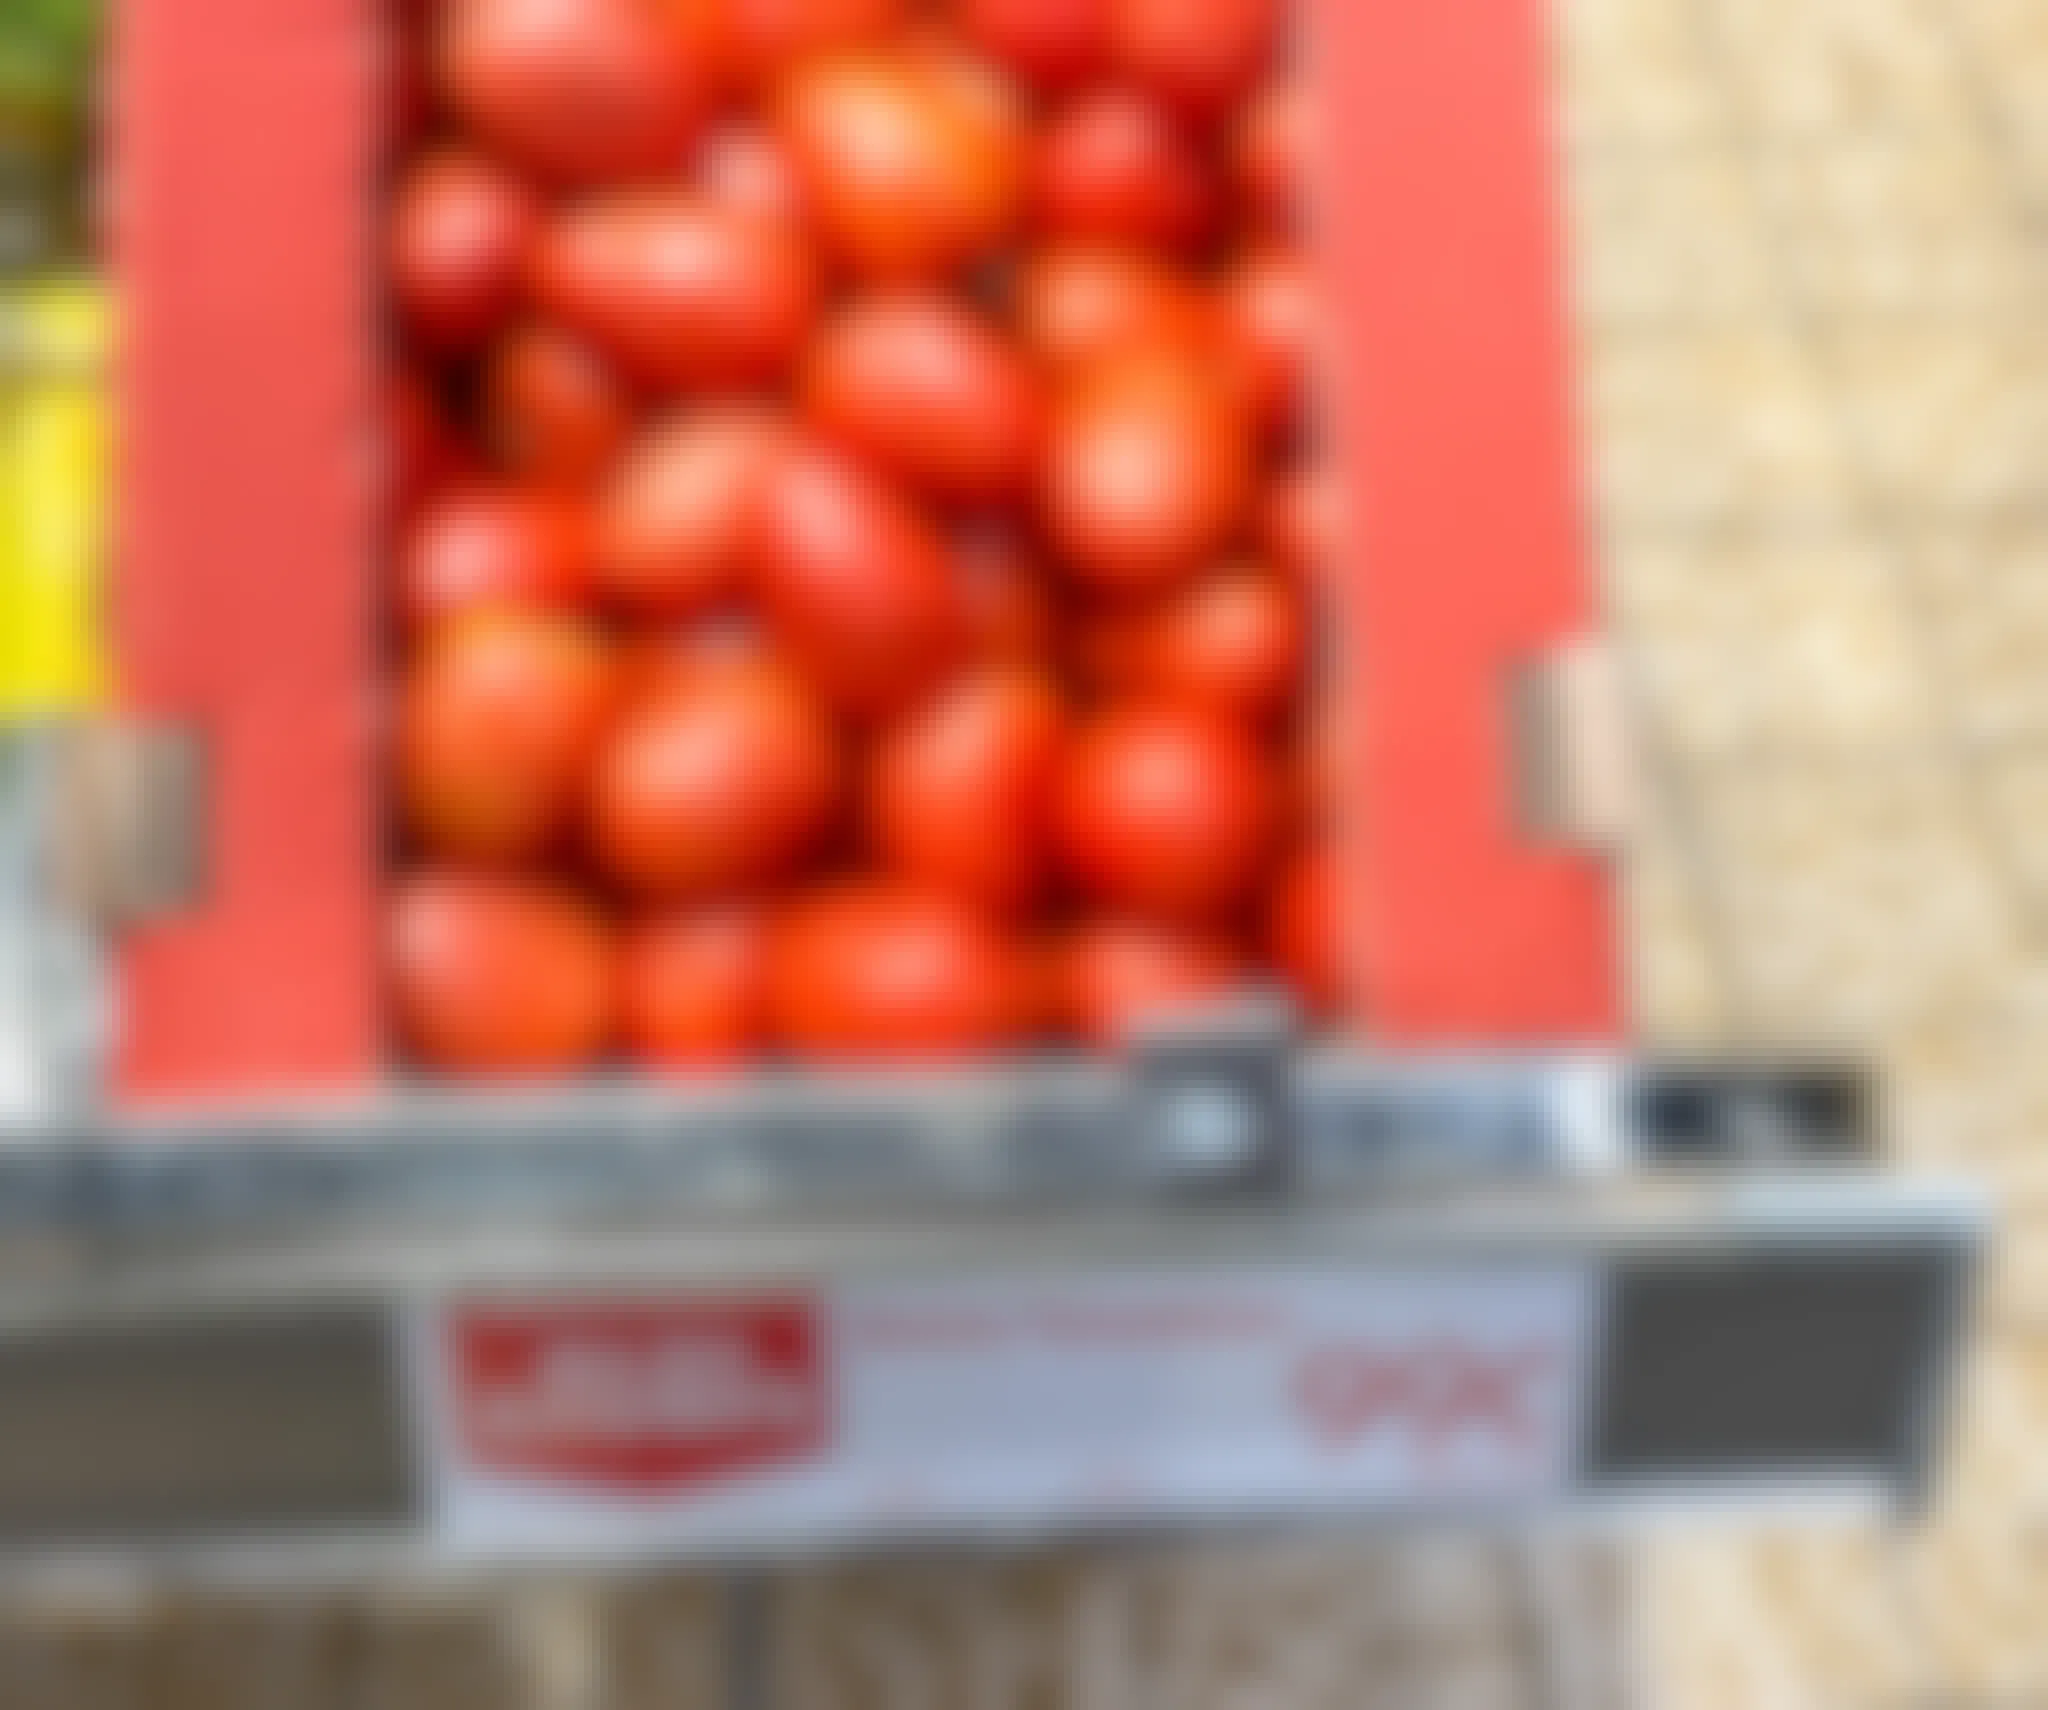 roma tomatoes in a box with sale sign at aldi